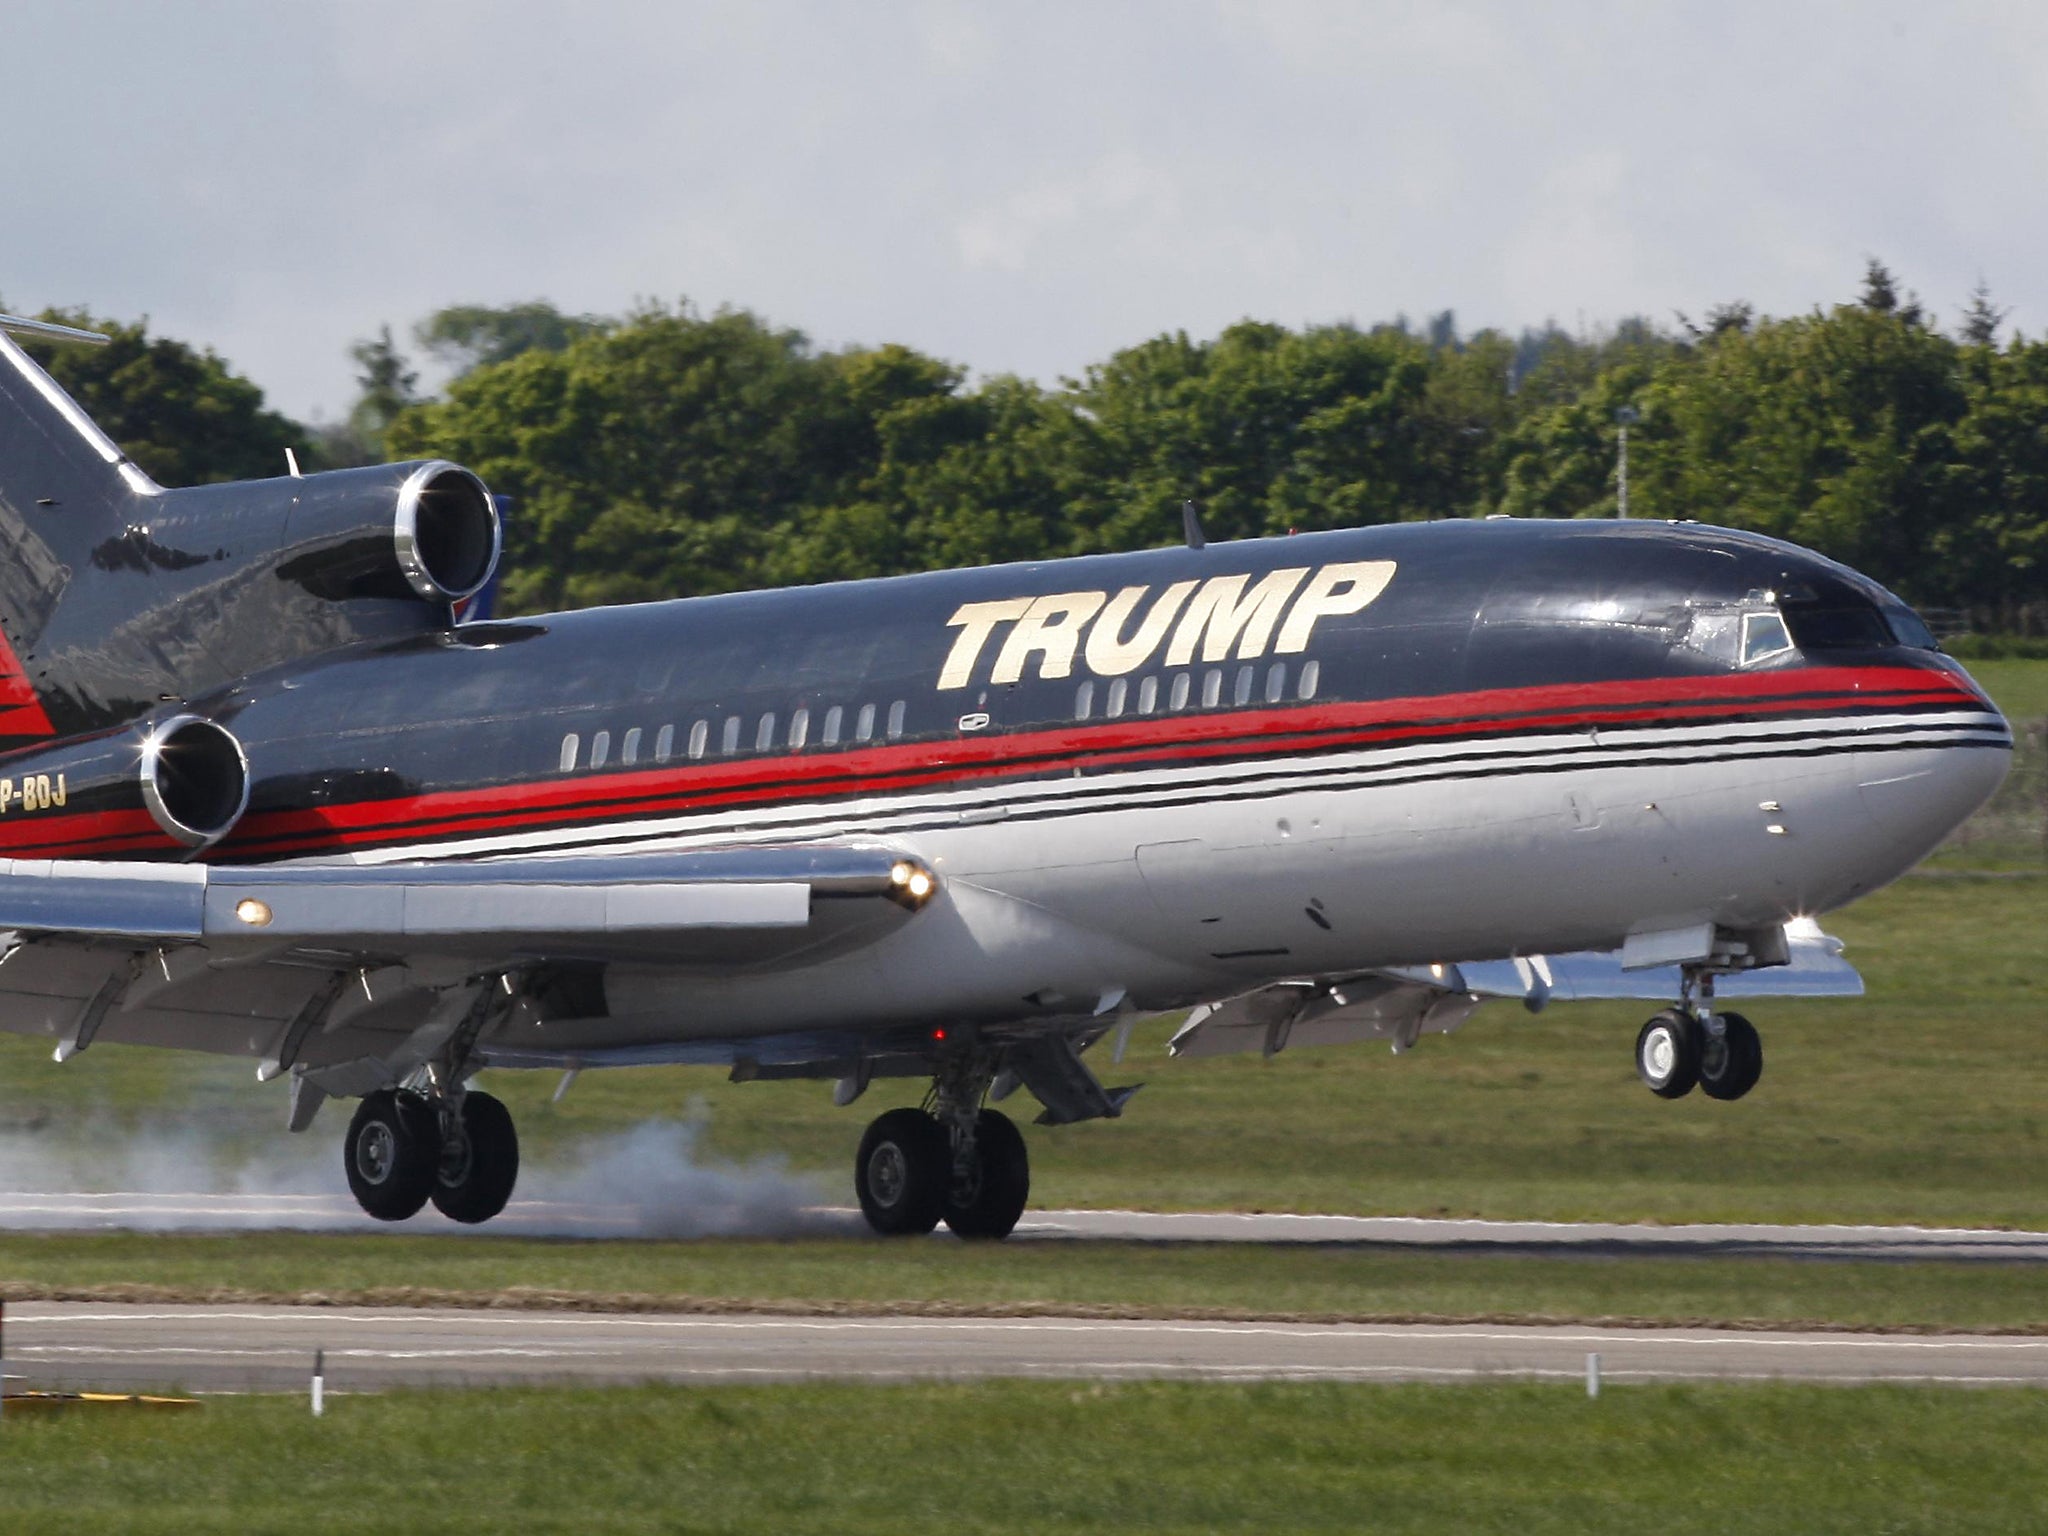 Donald Trump is among private jet owners who are to be exempted under the Senate bill